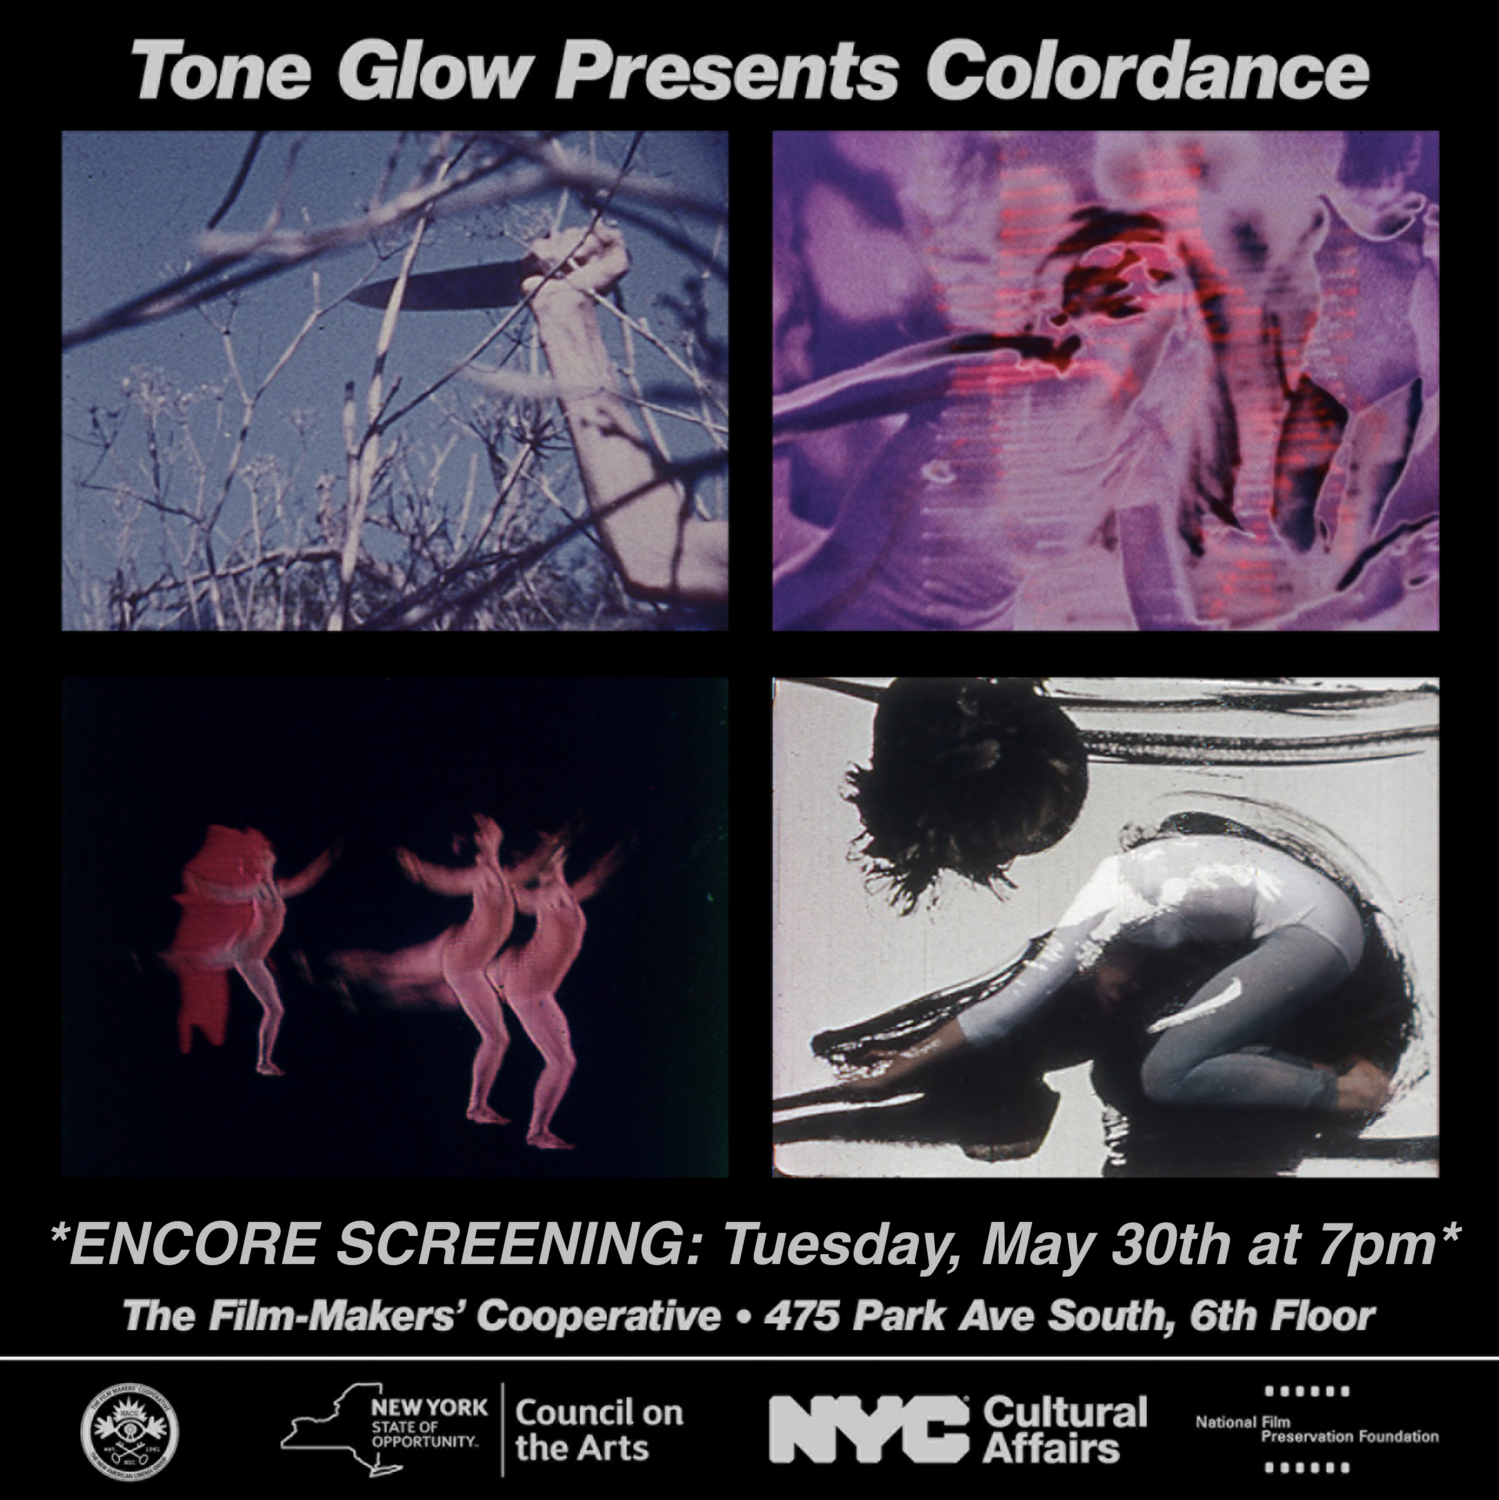 An ENCORE SCREENING of Tone Glow Presents "Colordance"